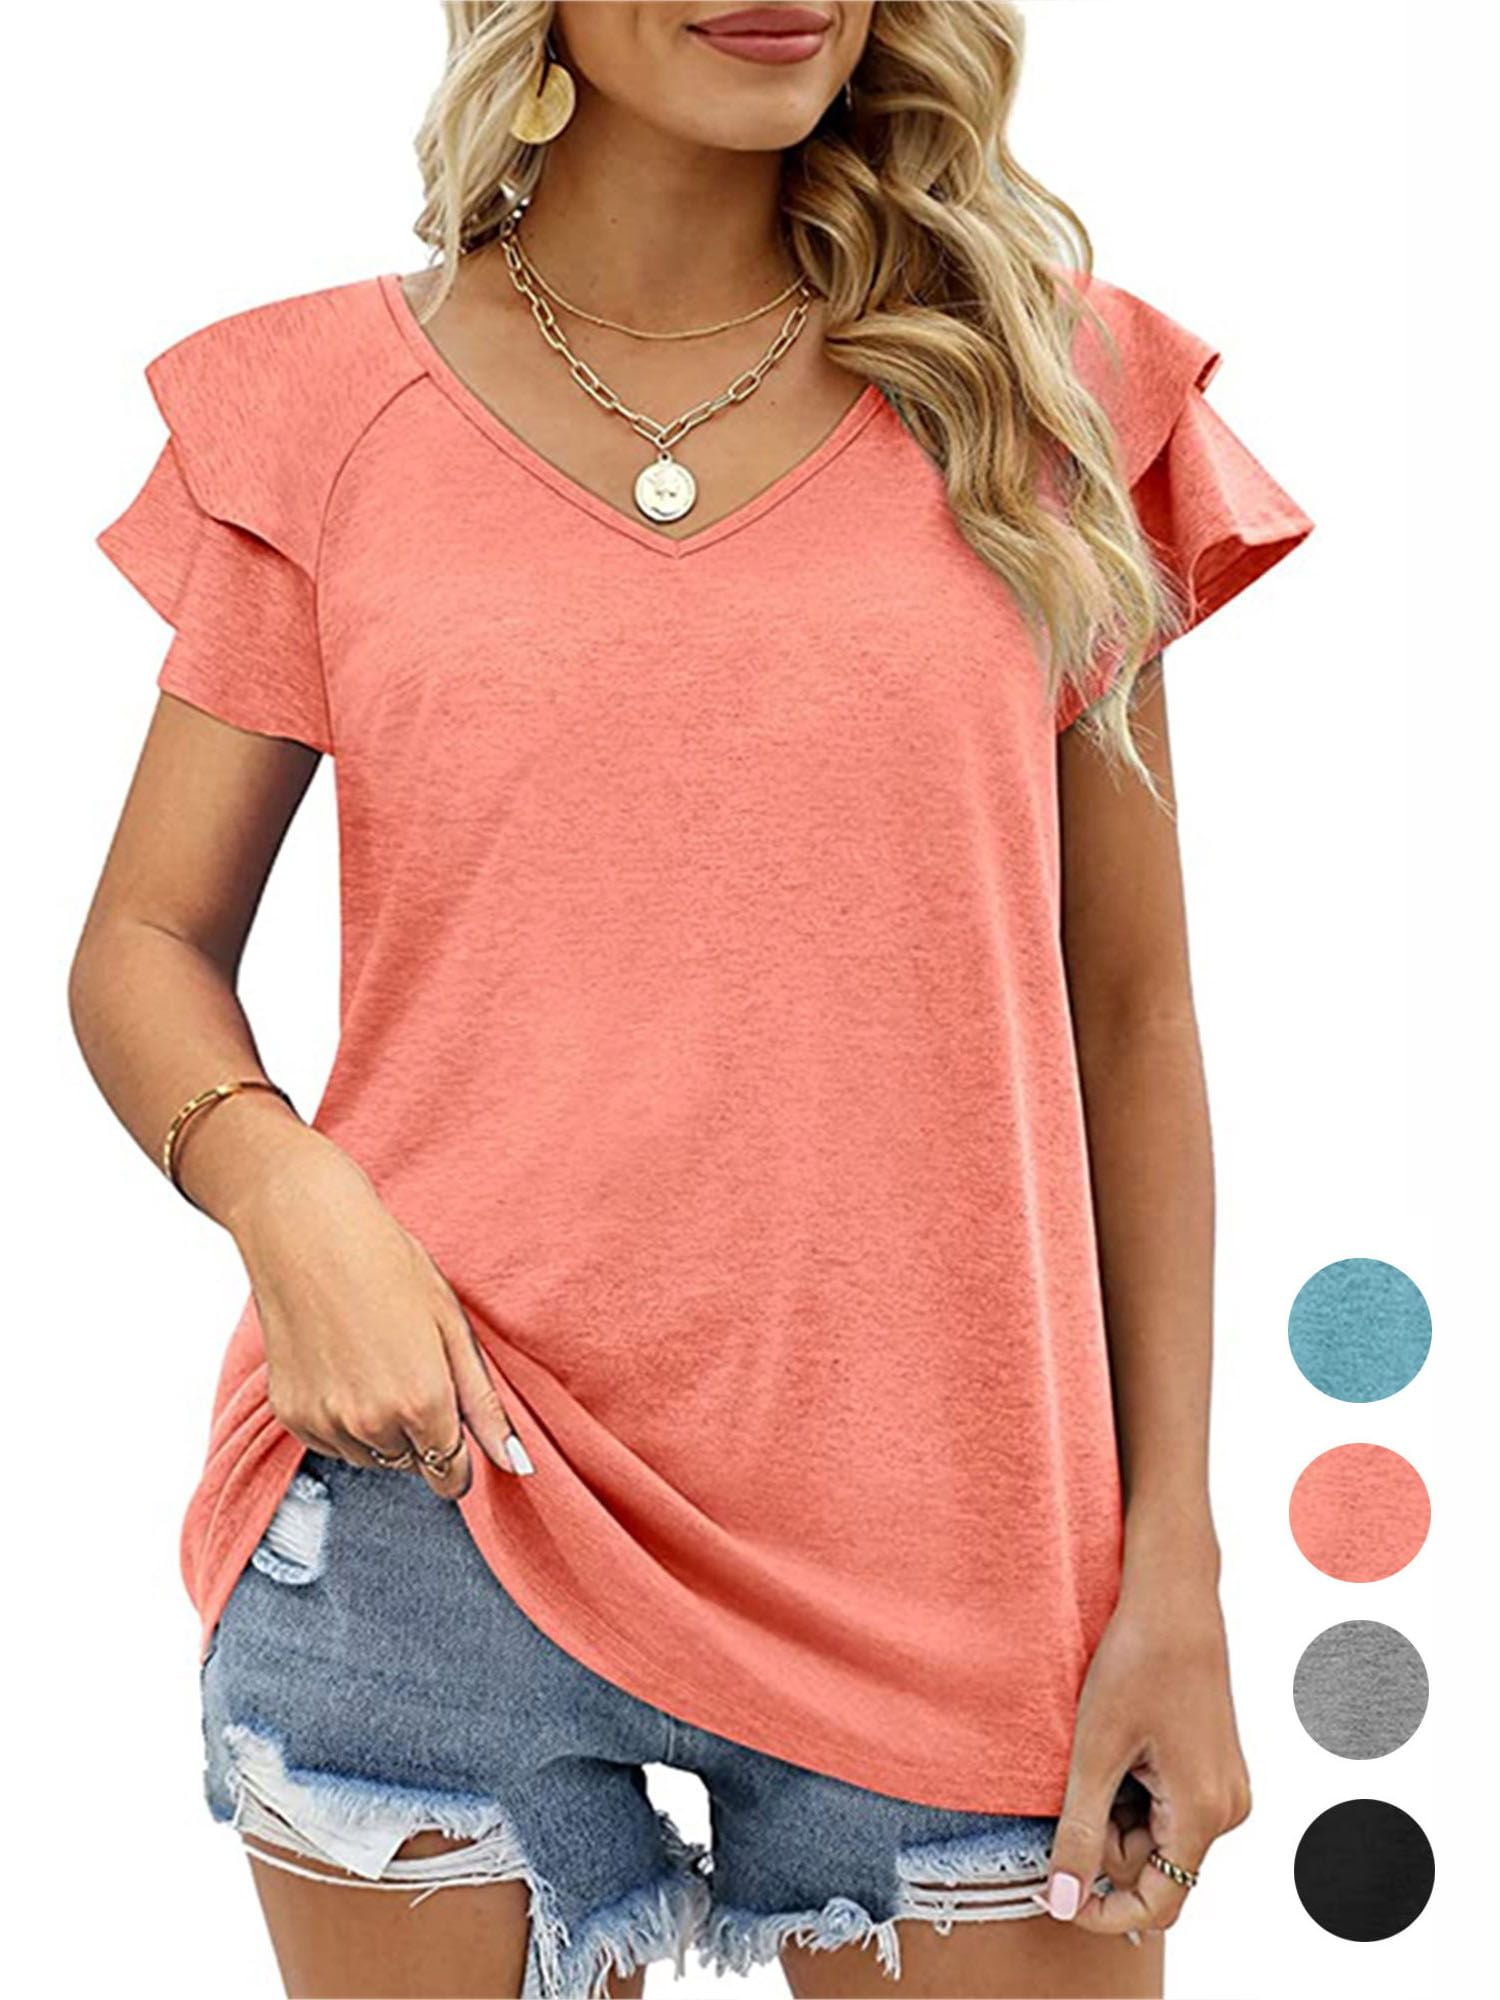 Women's Ruffle V-Neck T-Shirt Solid Casual V Neck Short Sleeve Tops Summer Loose Blouses Shirts 